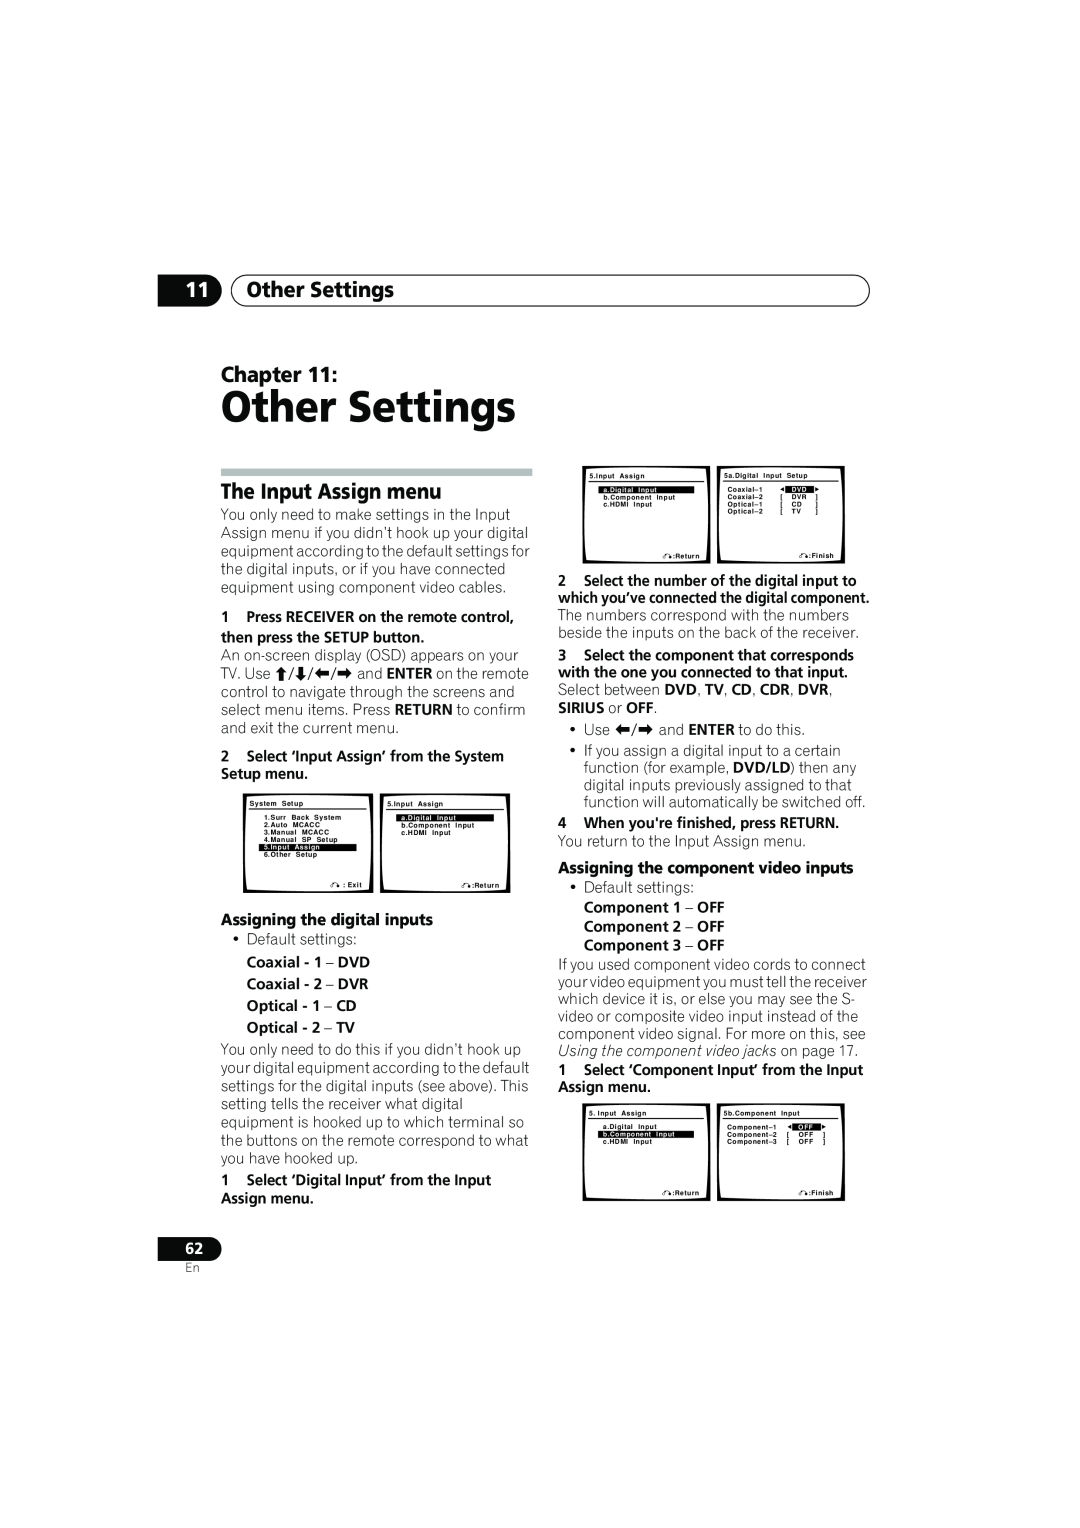 Pioneer VSX-917V manual 11Other Settings Chapter, The Input Assign menu, Assigning the digital inputs 